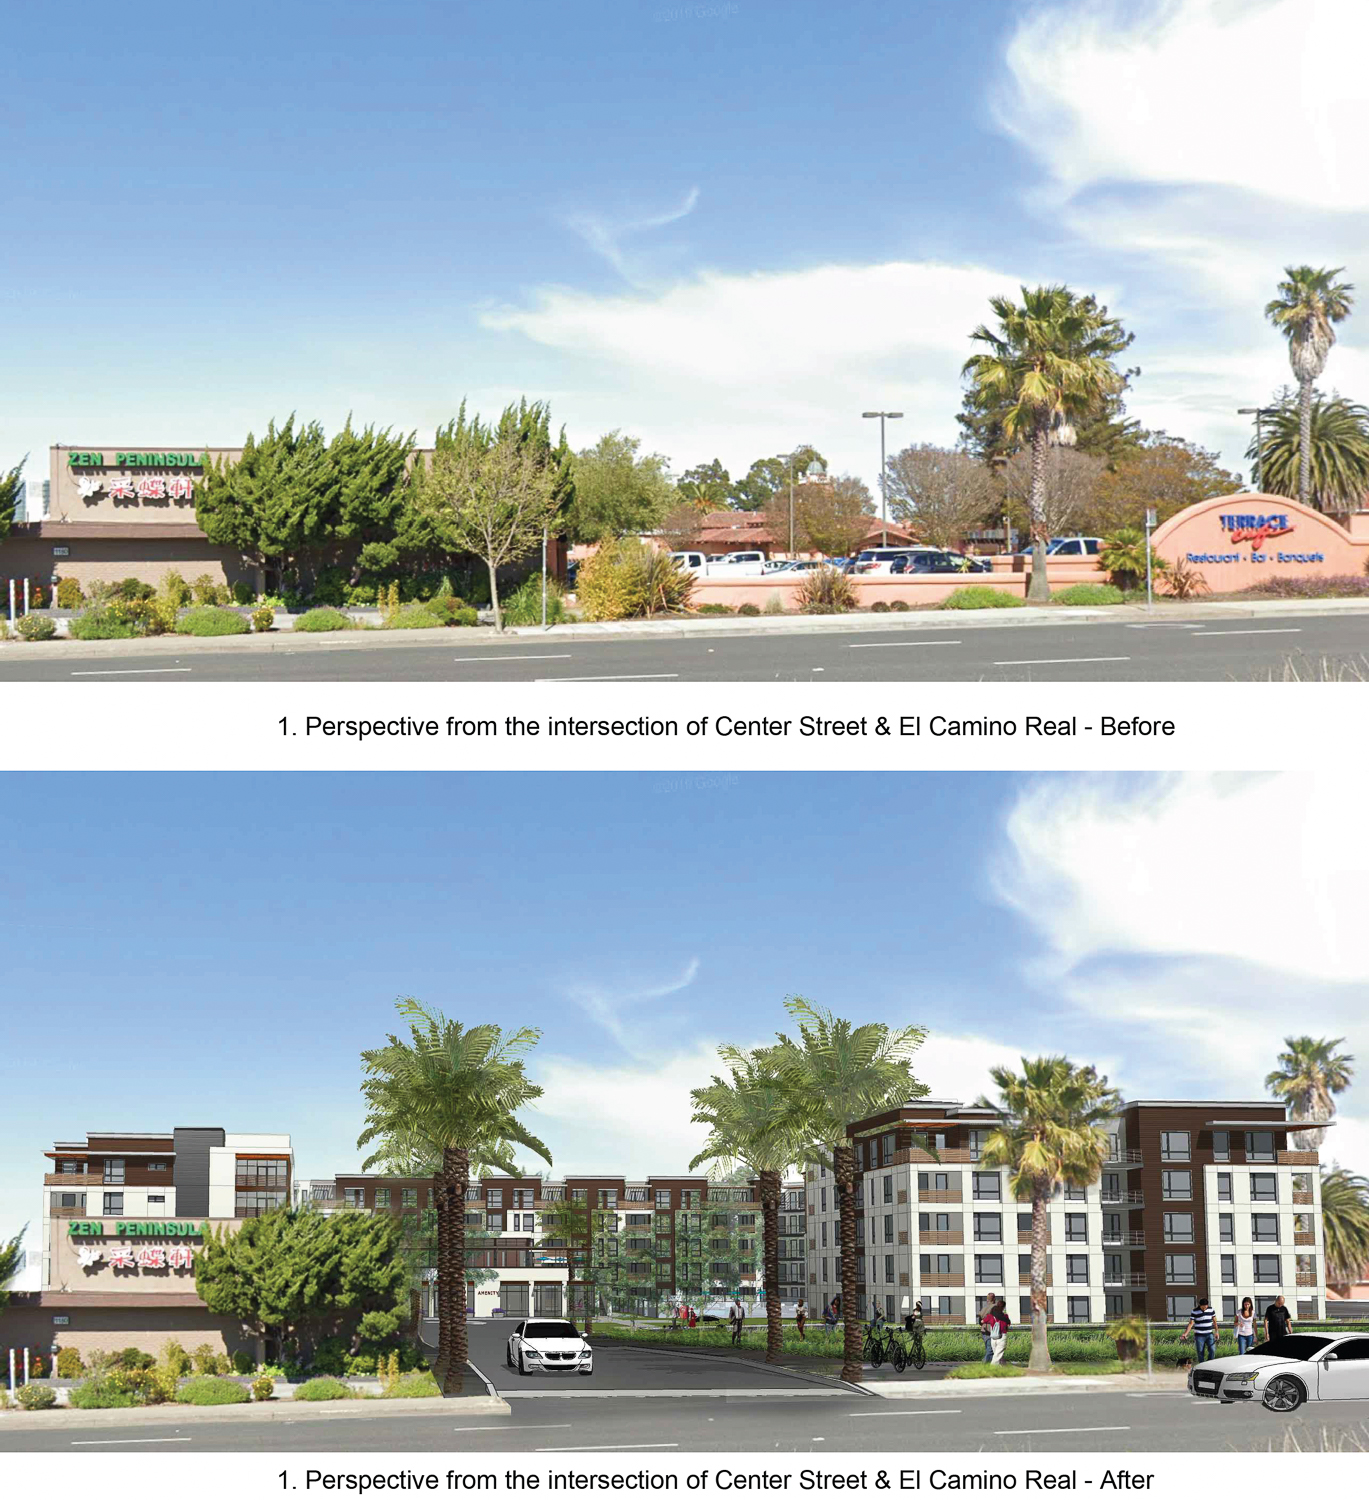 1100 El Camino Real existing condition verus proposed project, rendering by KTGY Group